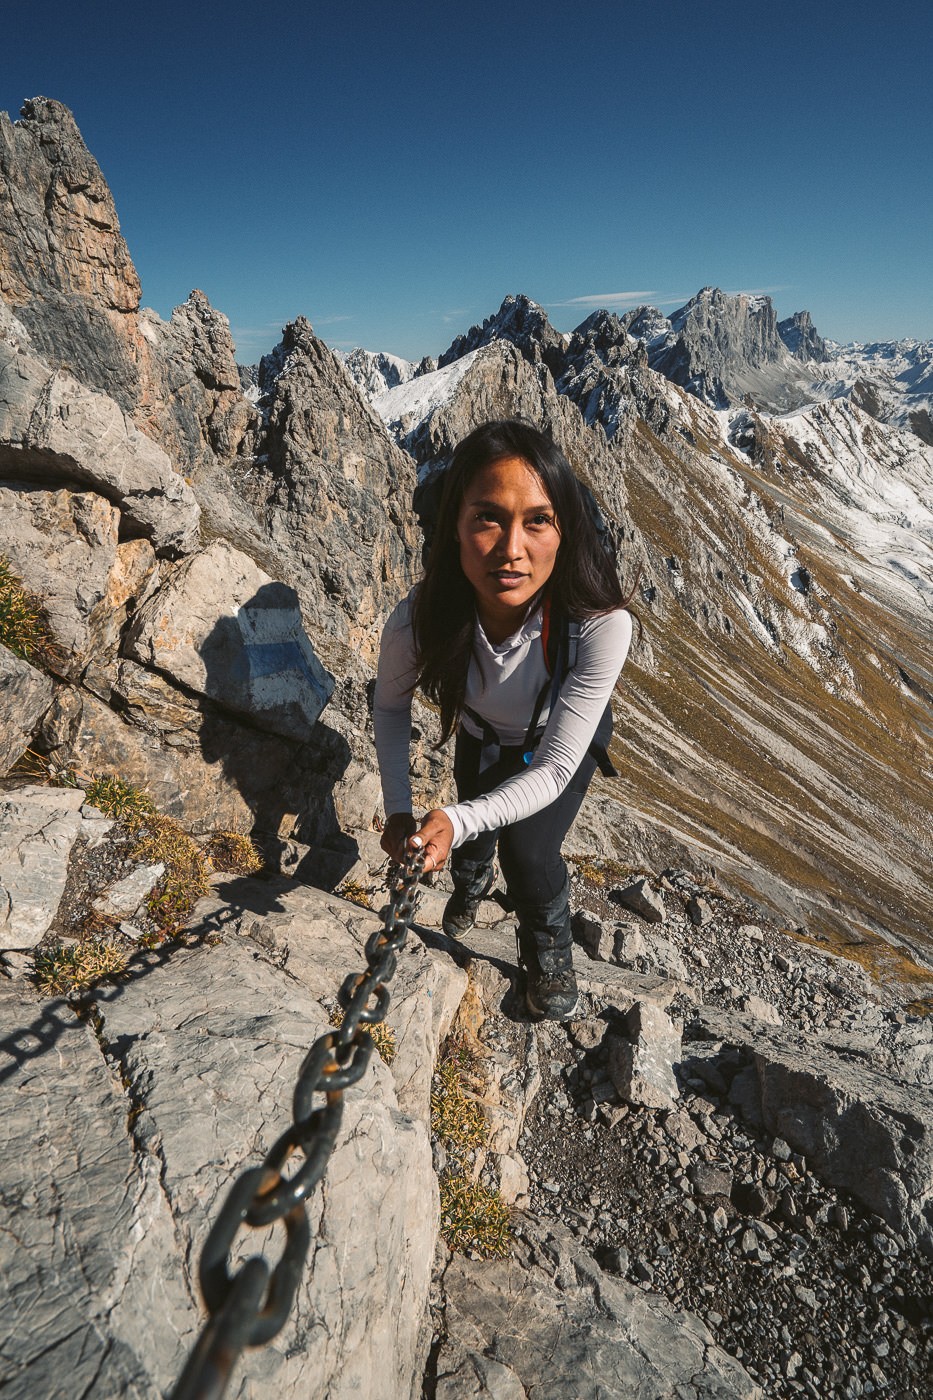 a woman is climbing up a mountain with a chain.